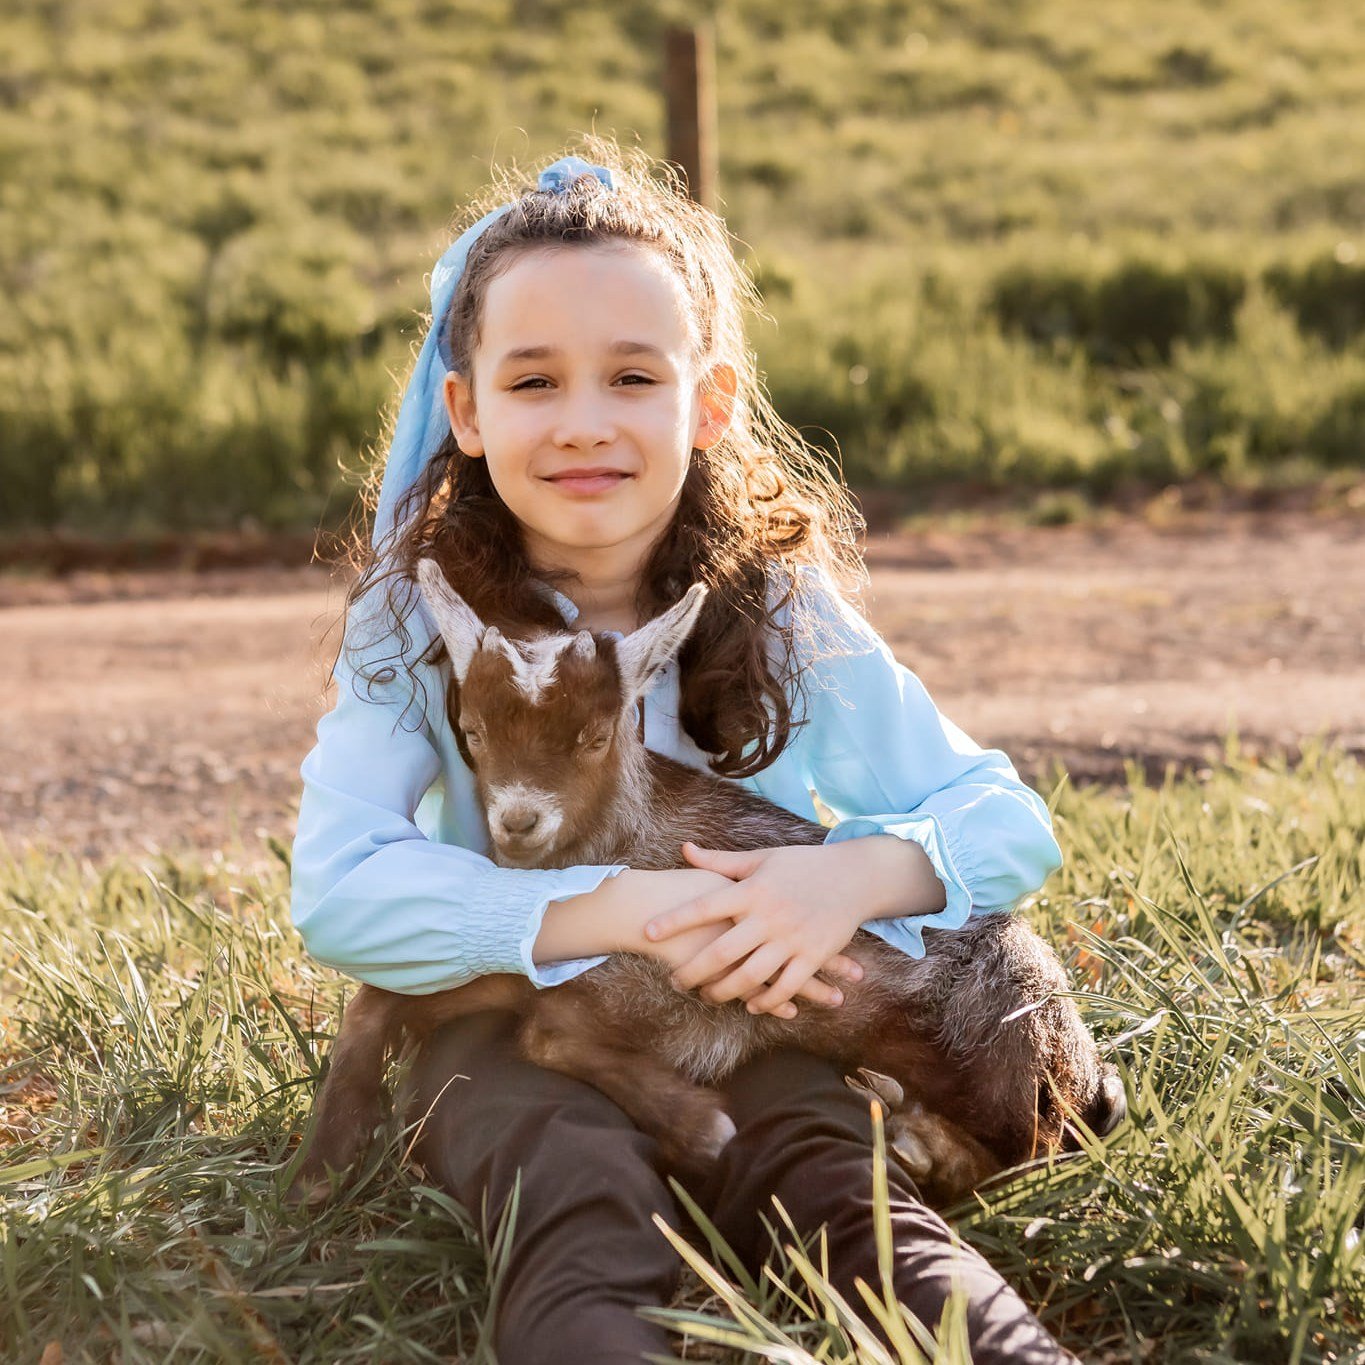 Children or baby goats, which ones will sit still the longest 🤔 🤣 

These were so much fun, I'm so glad I got to partner up with Honey Brook Farm for these!